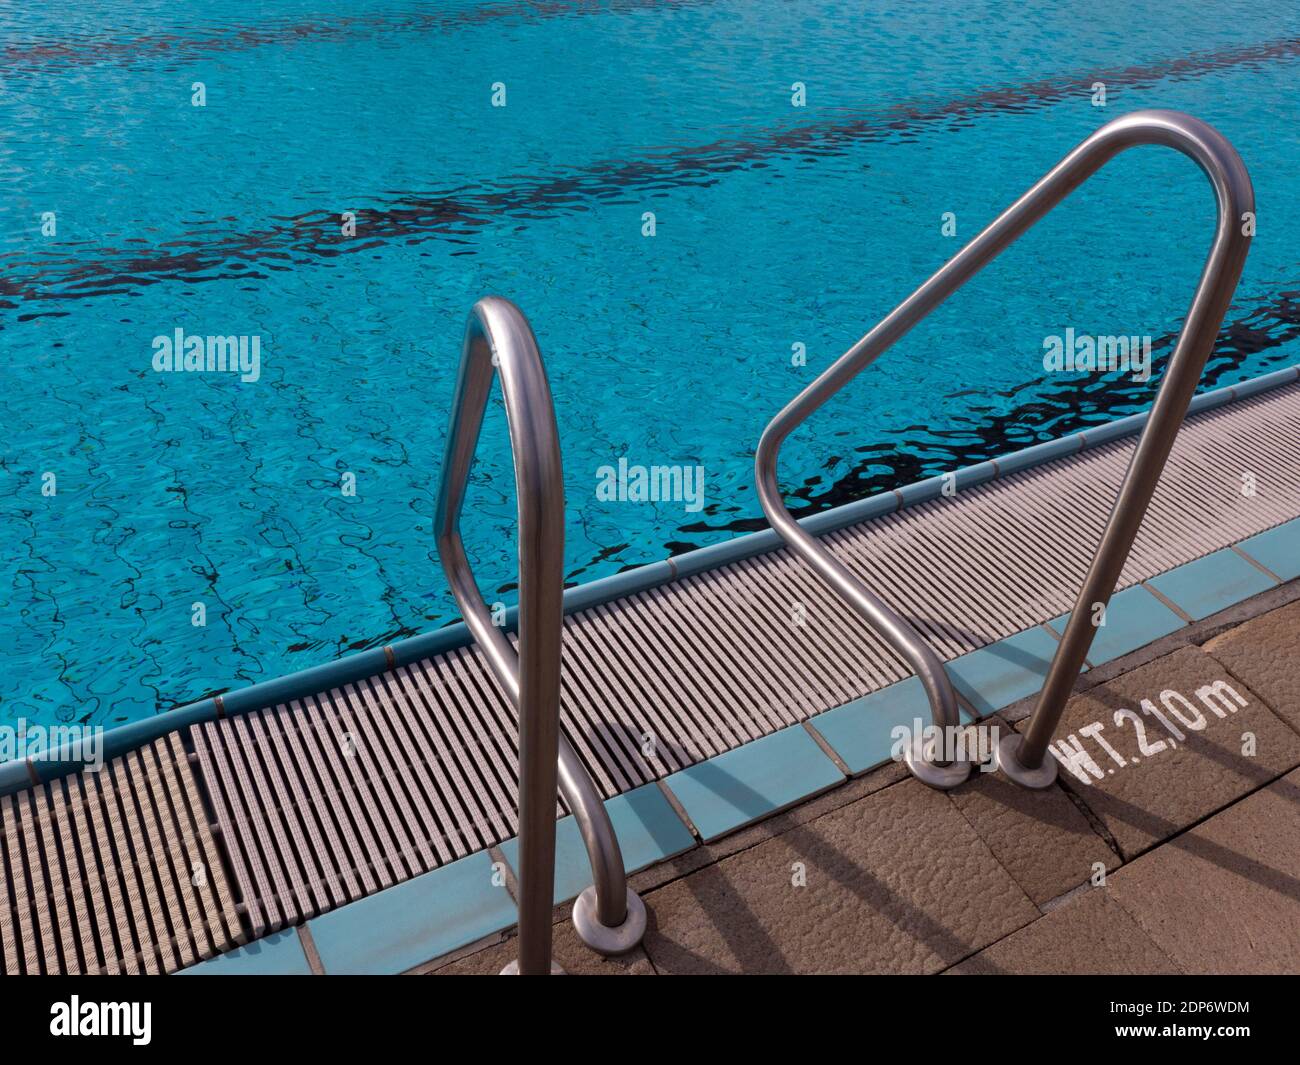 Entrance with a ladder or stairs in the water of a swimming pool. The handles and the railing is made of stainless steel. Stock Photo